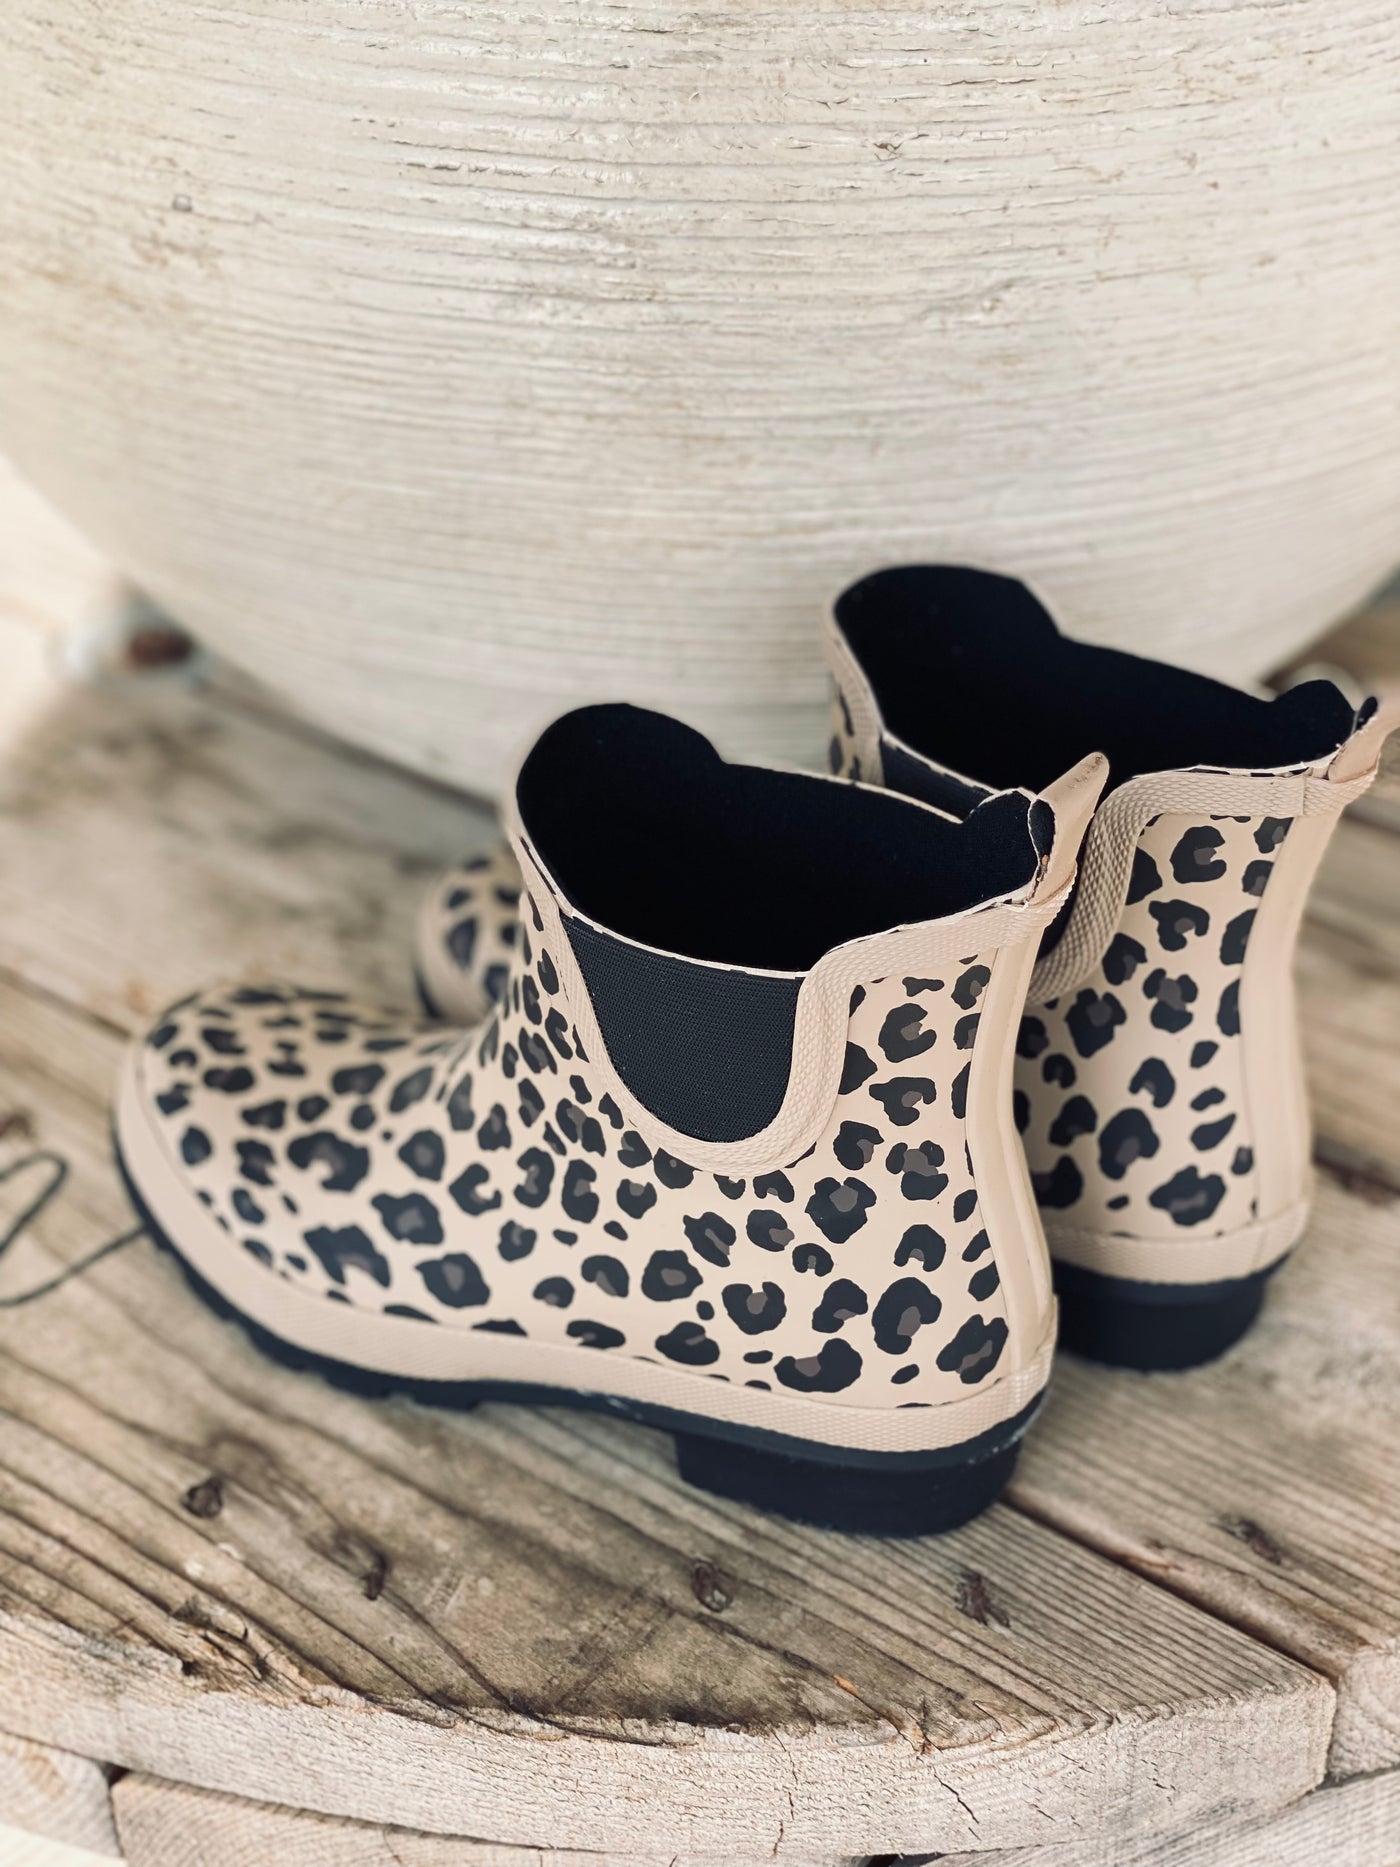 Corky’s Leopard Yikes Ankle Rain Bootie